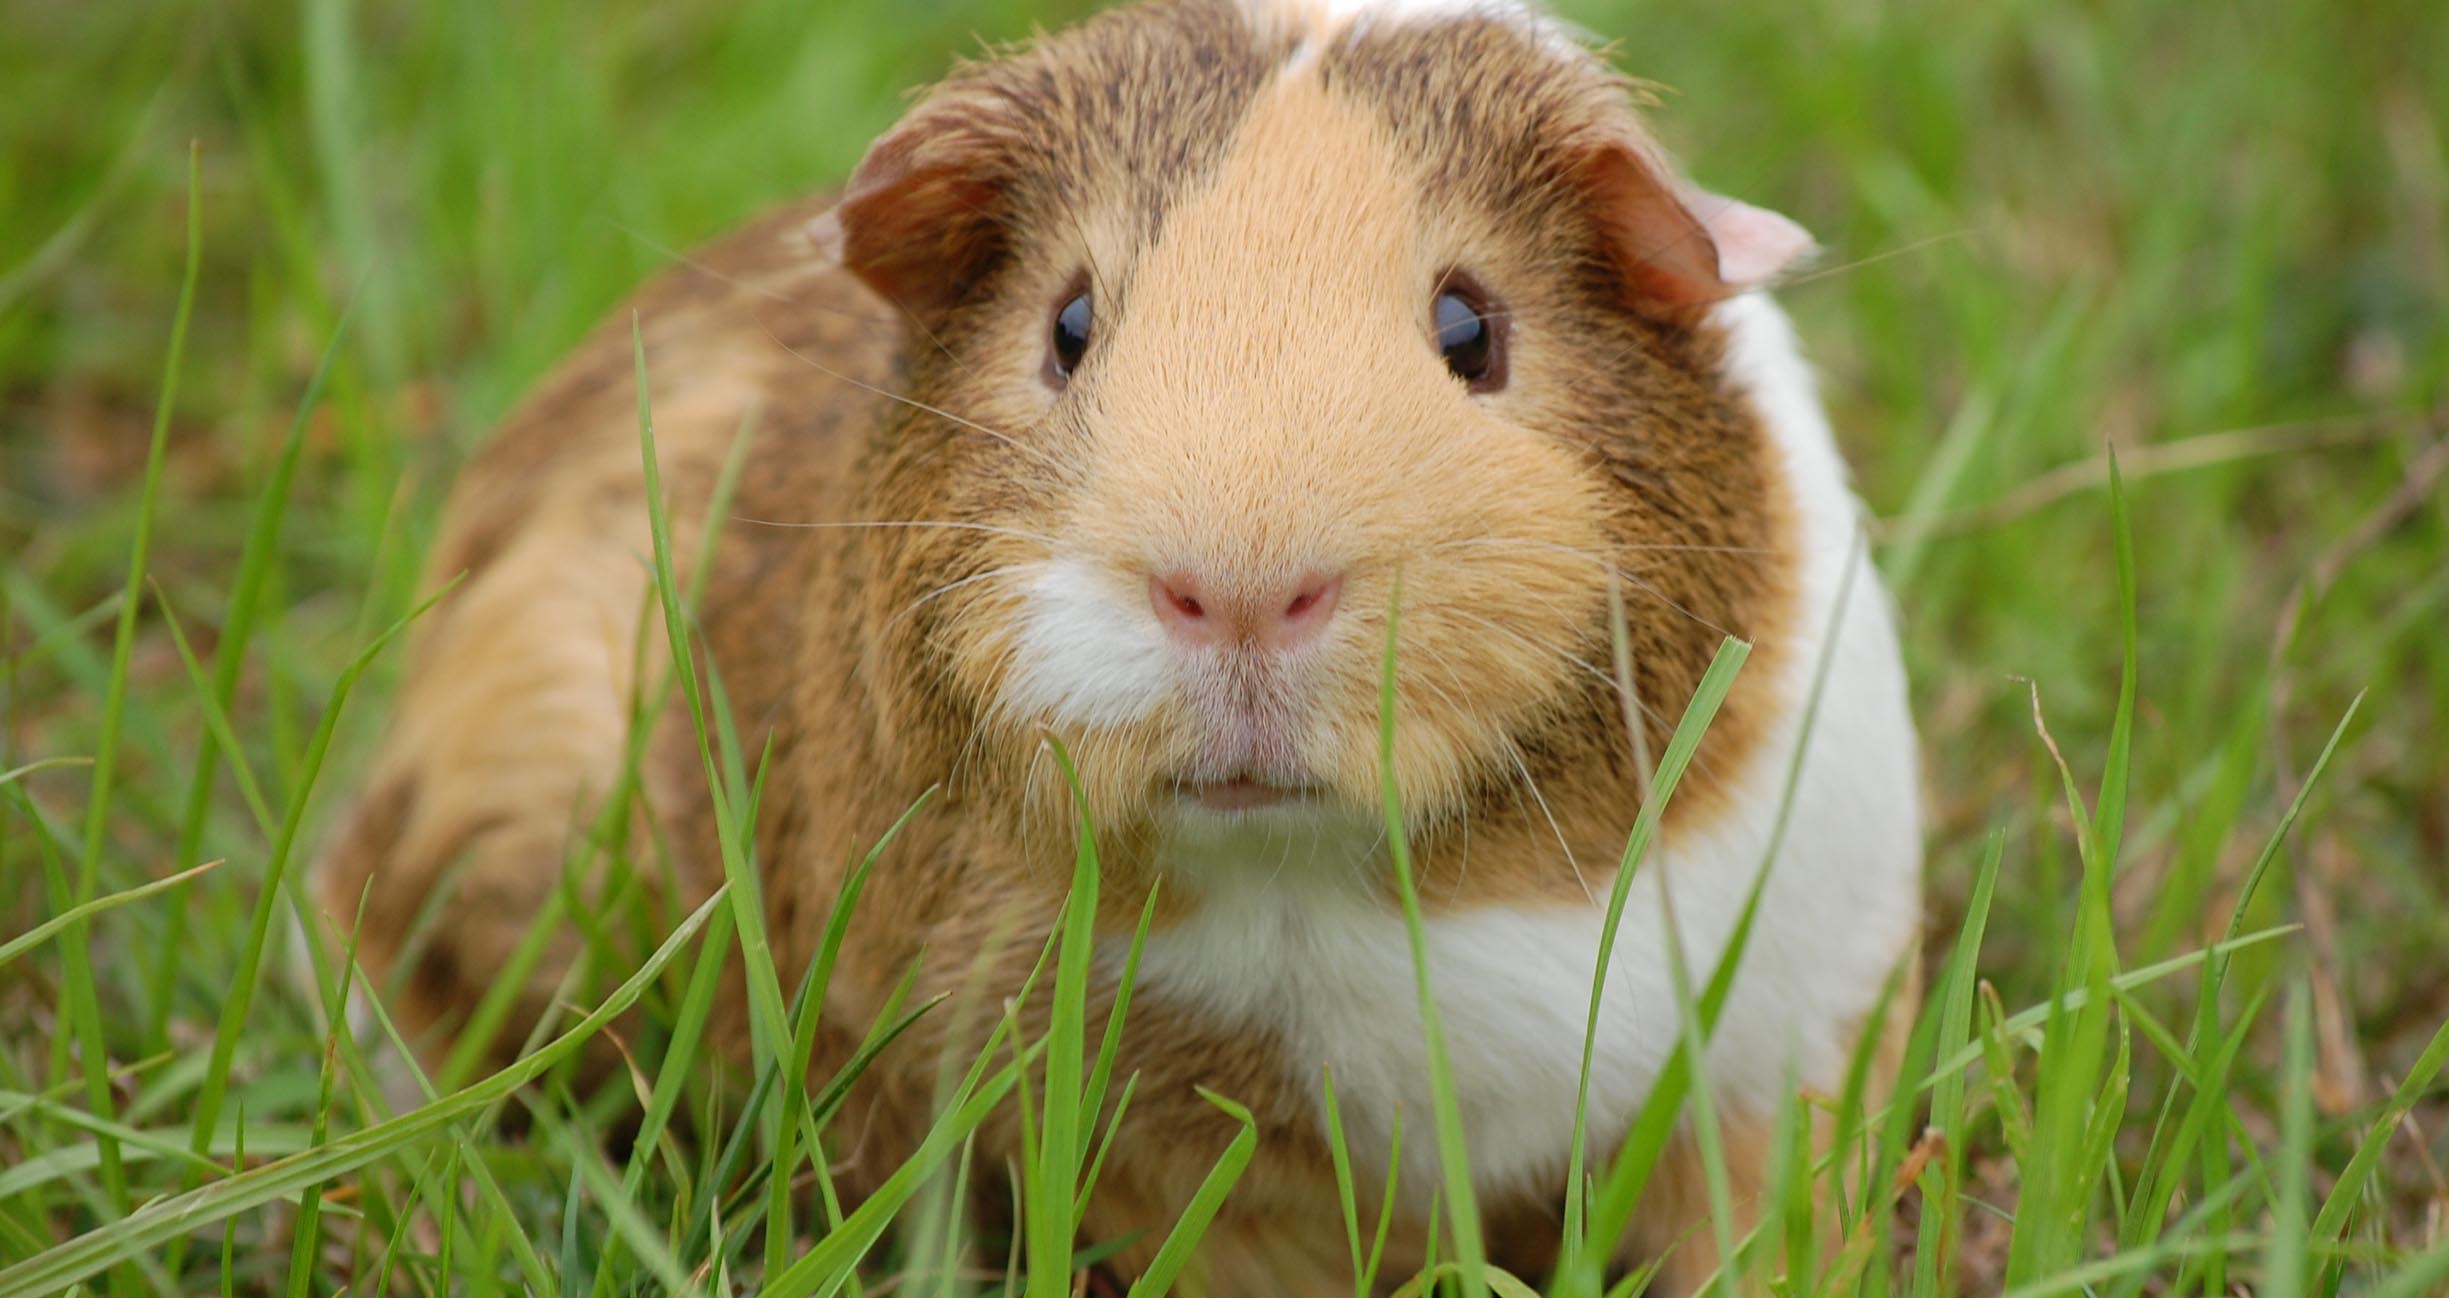 A brown and white guinea pig nibbles some long grass